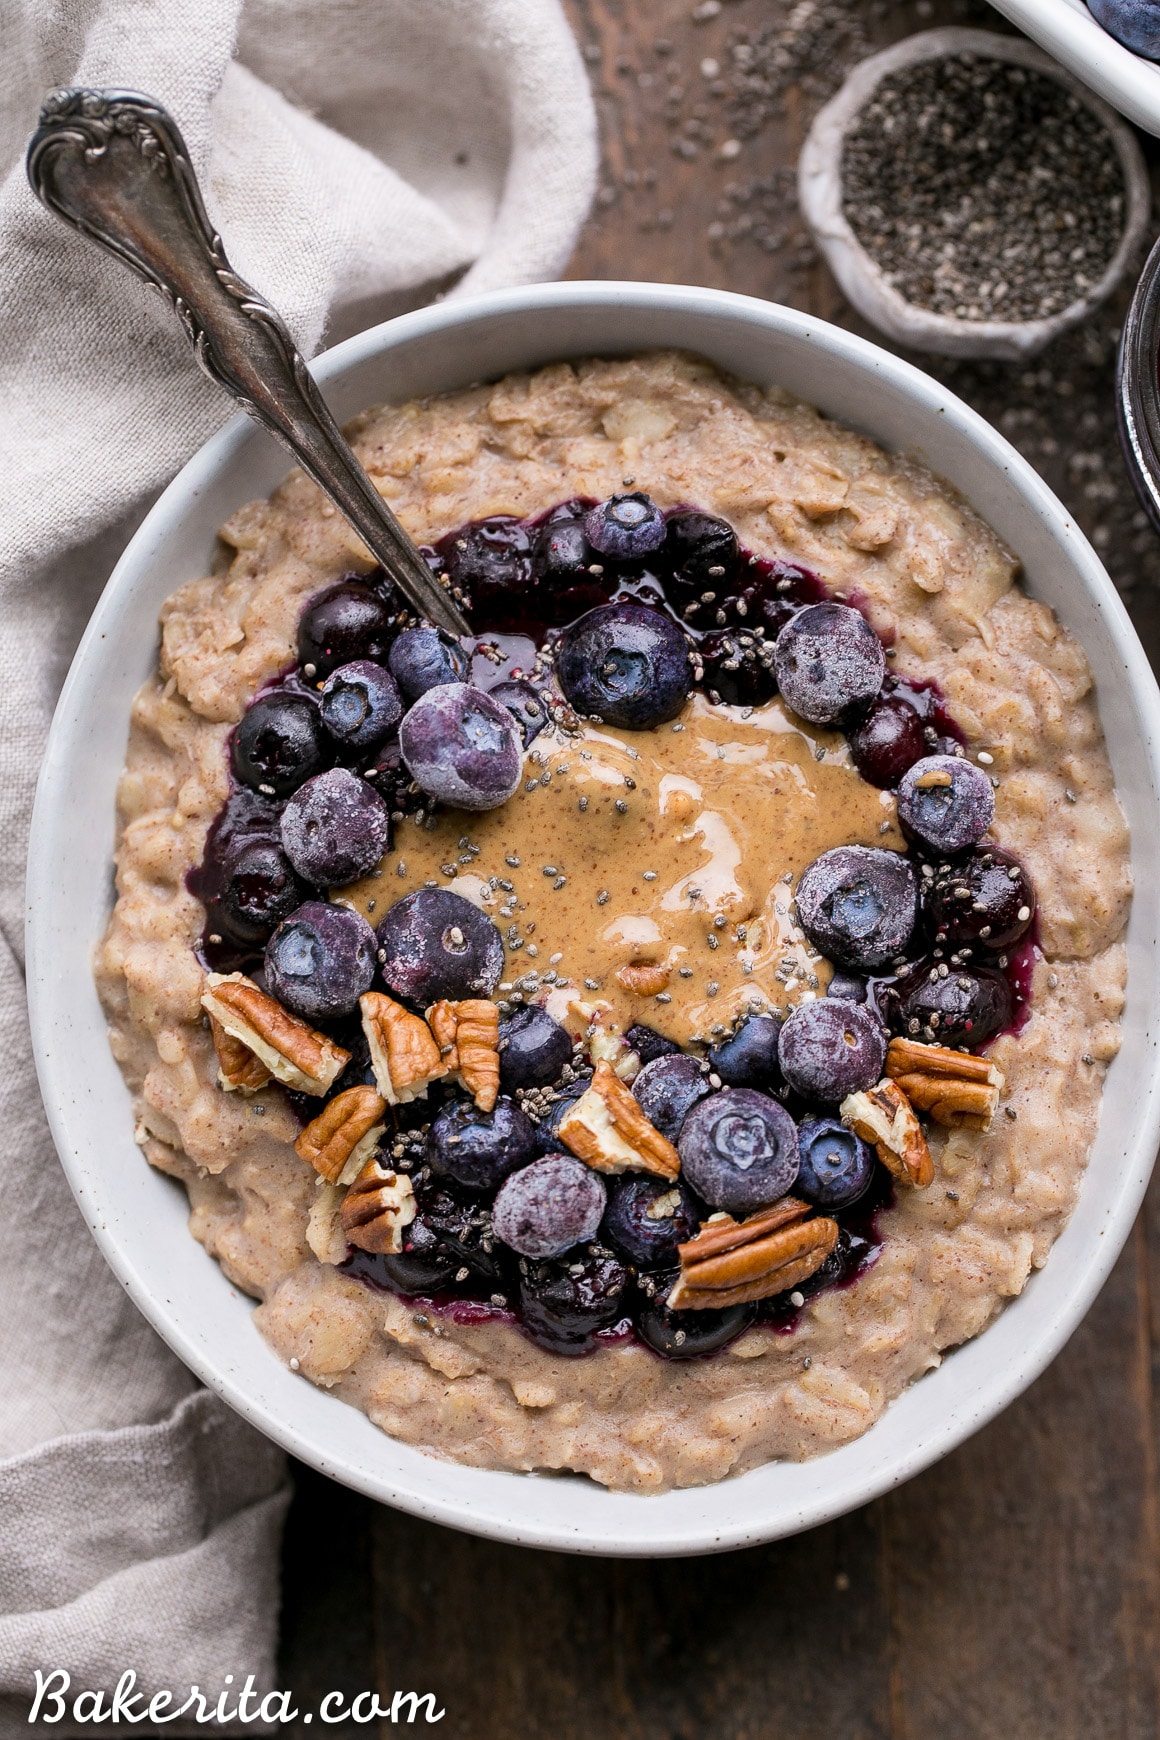 This simple Blueberry Muffin Oatmeal is sweetened with a banana, spiced with cinnamon and topped with an easy blueberry compote! Top with all your favorite toppings for a delicious, healthy + filling breakfast that is far from boring. 